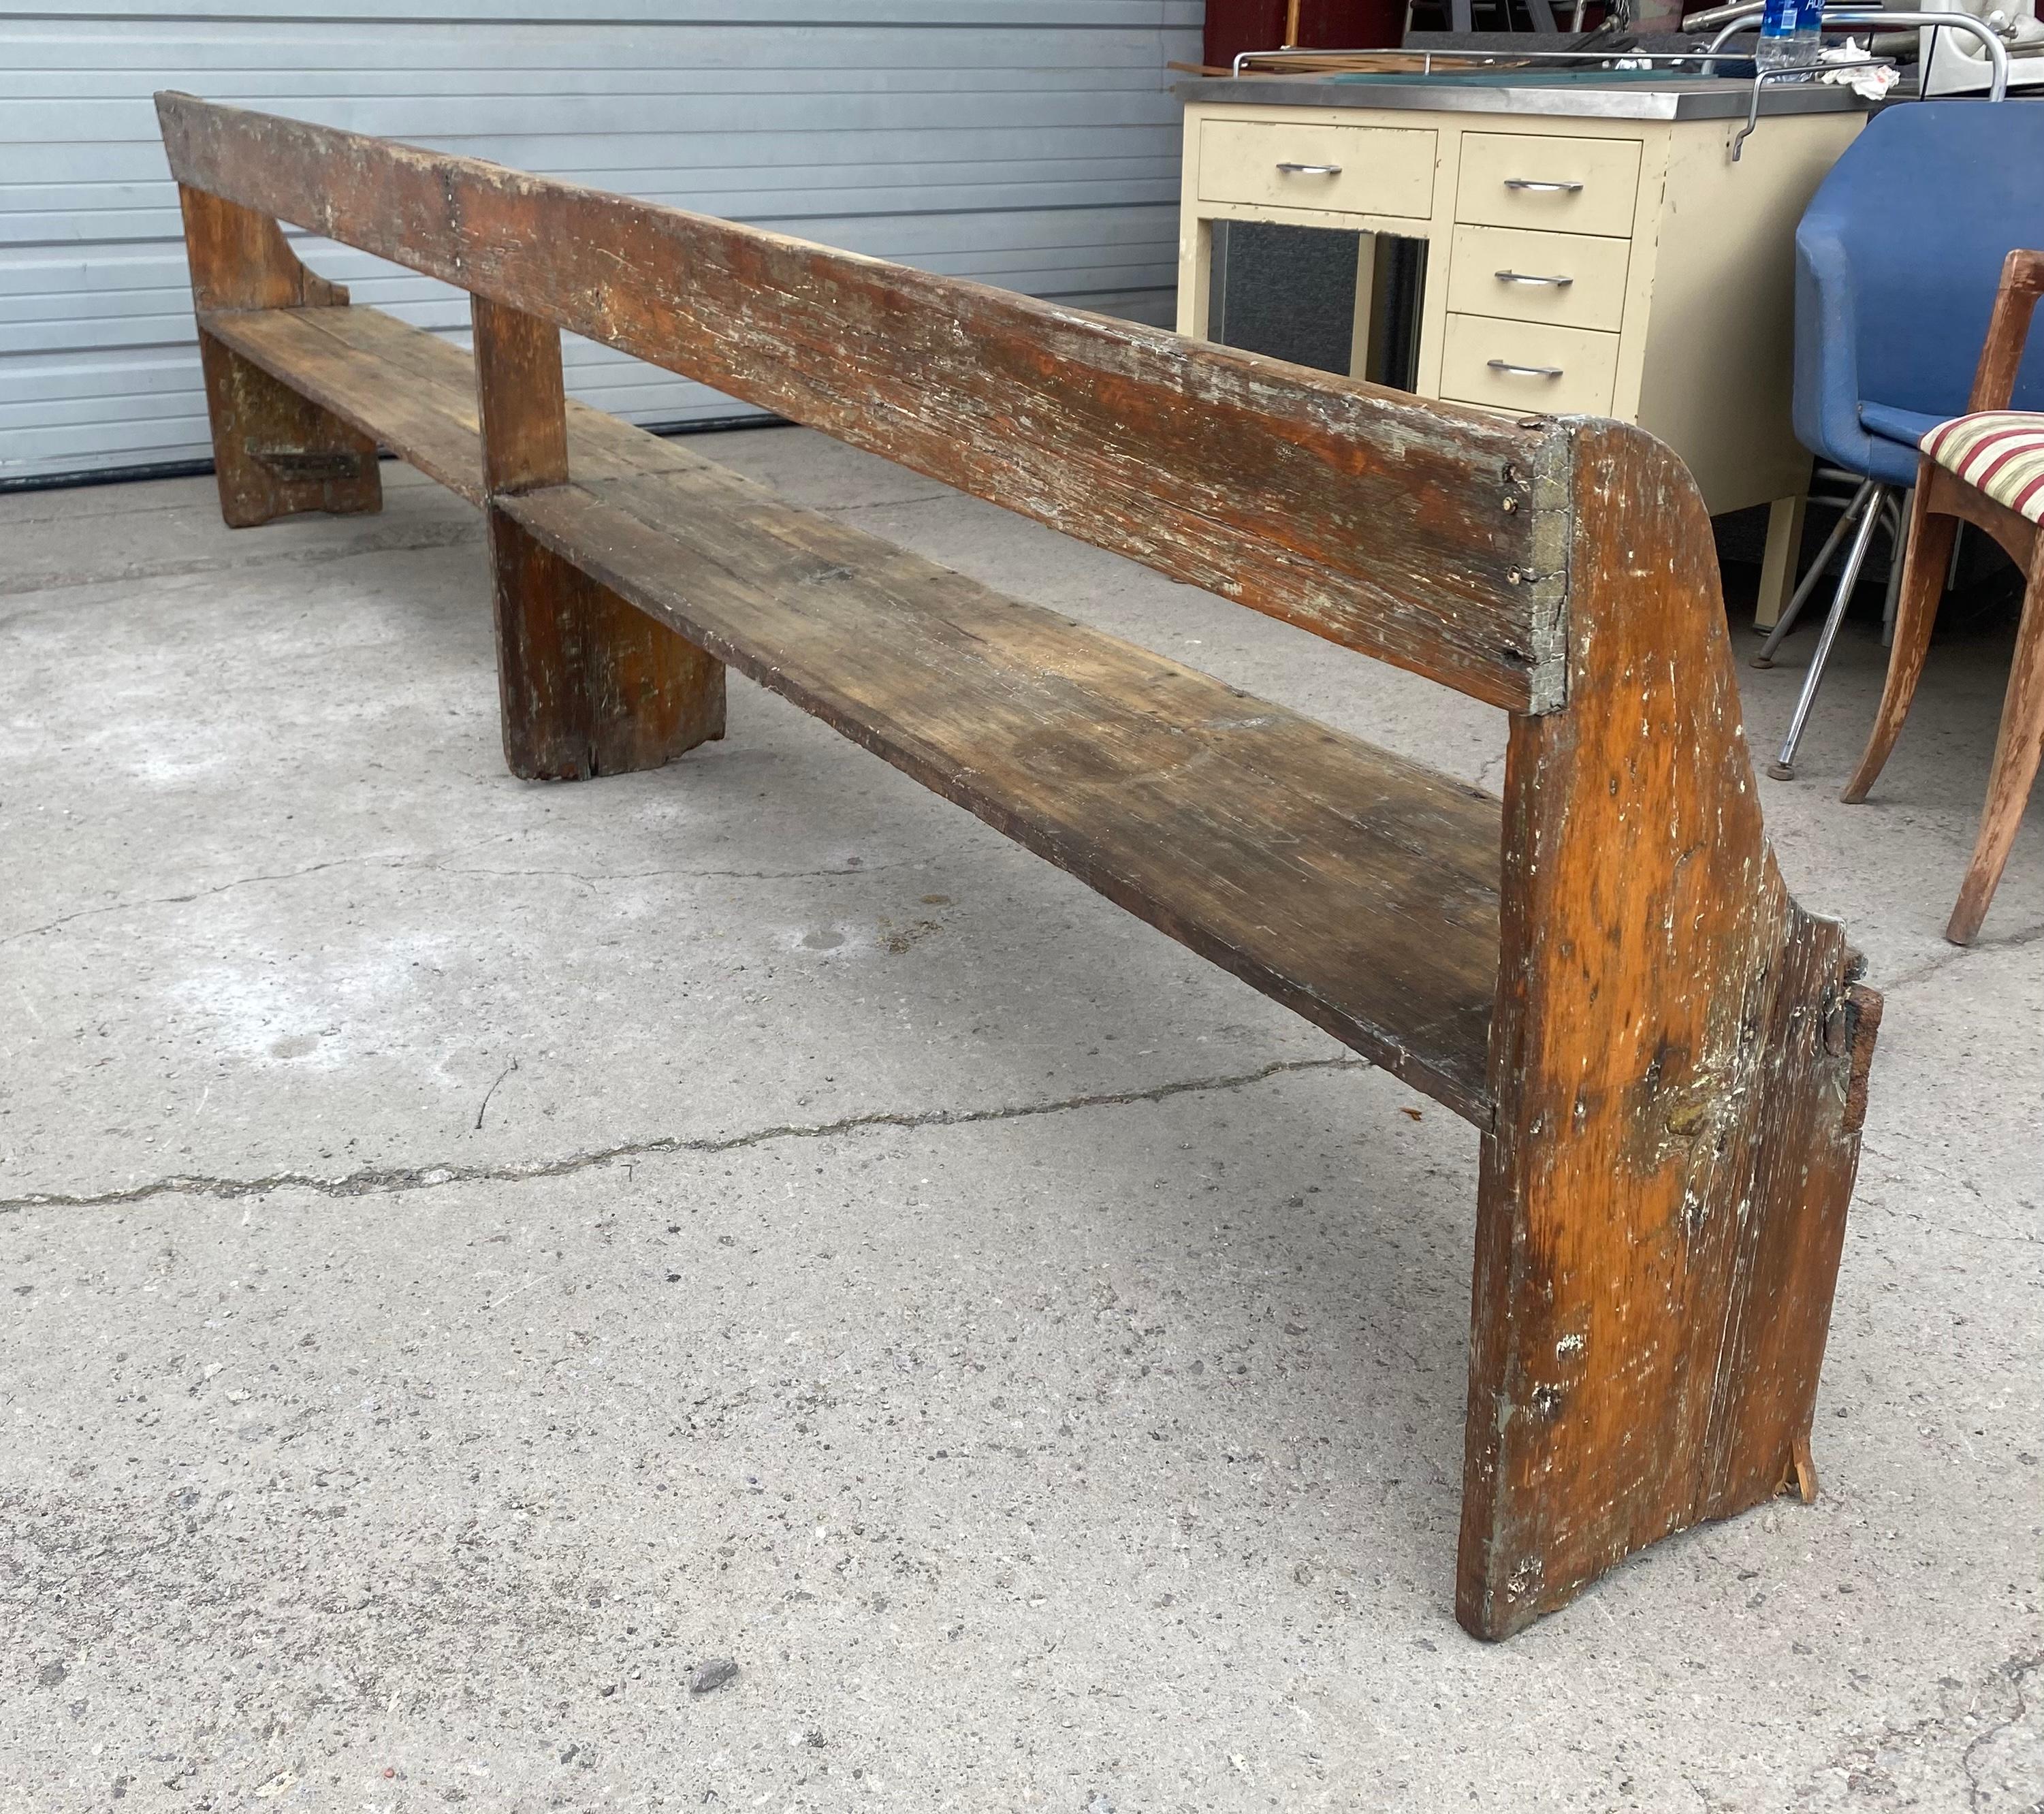 Early to mid 1800's single plank primitive bench,, refinished long .long time ago.. Wonderful old worn patina , finish.. would make a great pottery or plant stand.garden? Record albums,,,Perfect for loft warehouse, restaurant waiting seating.